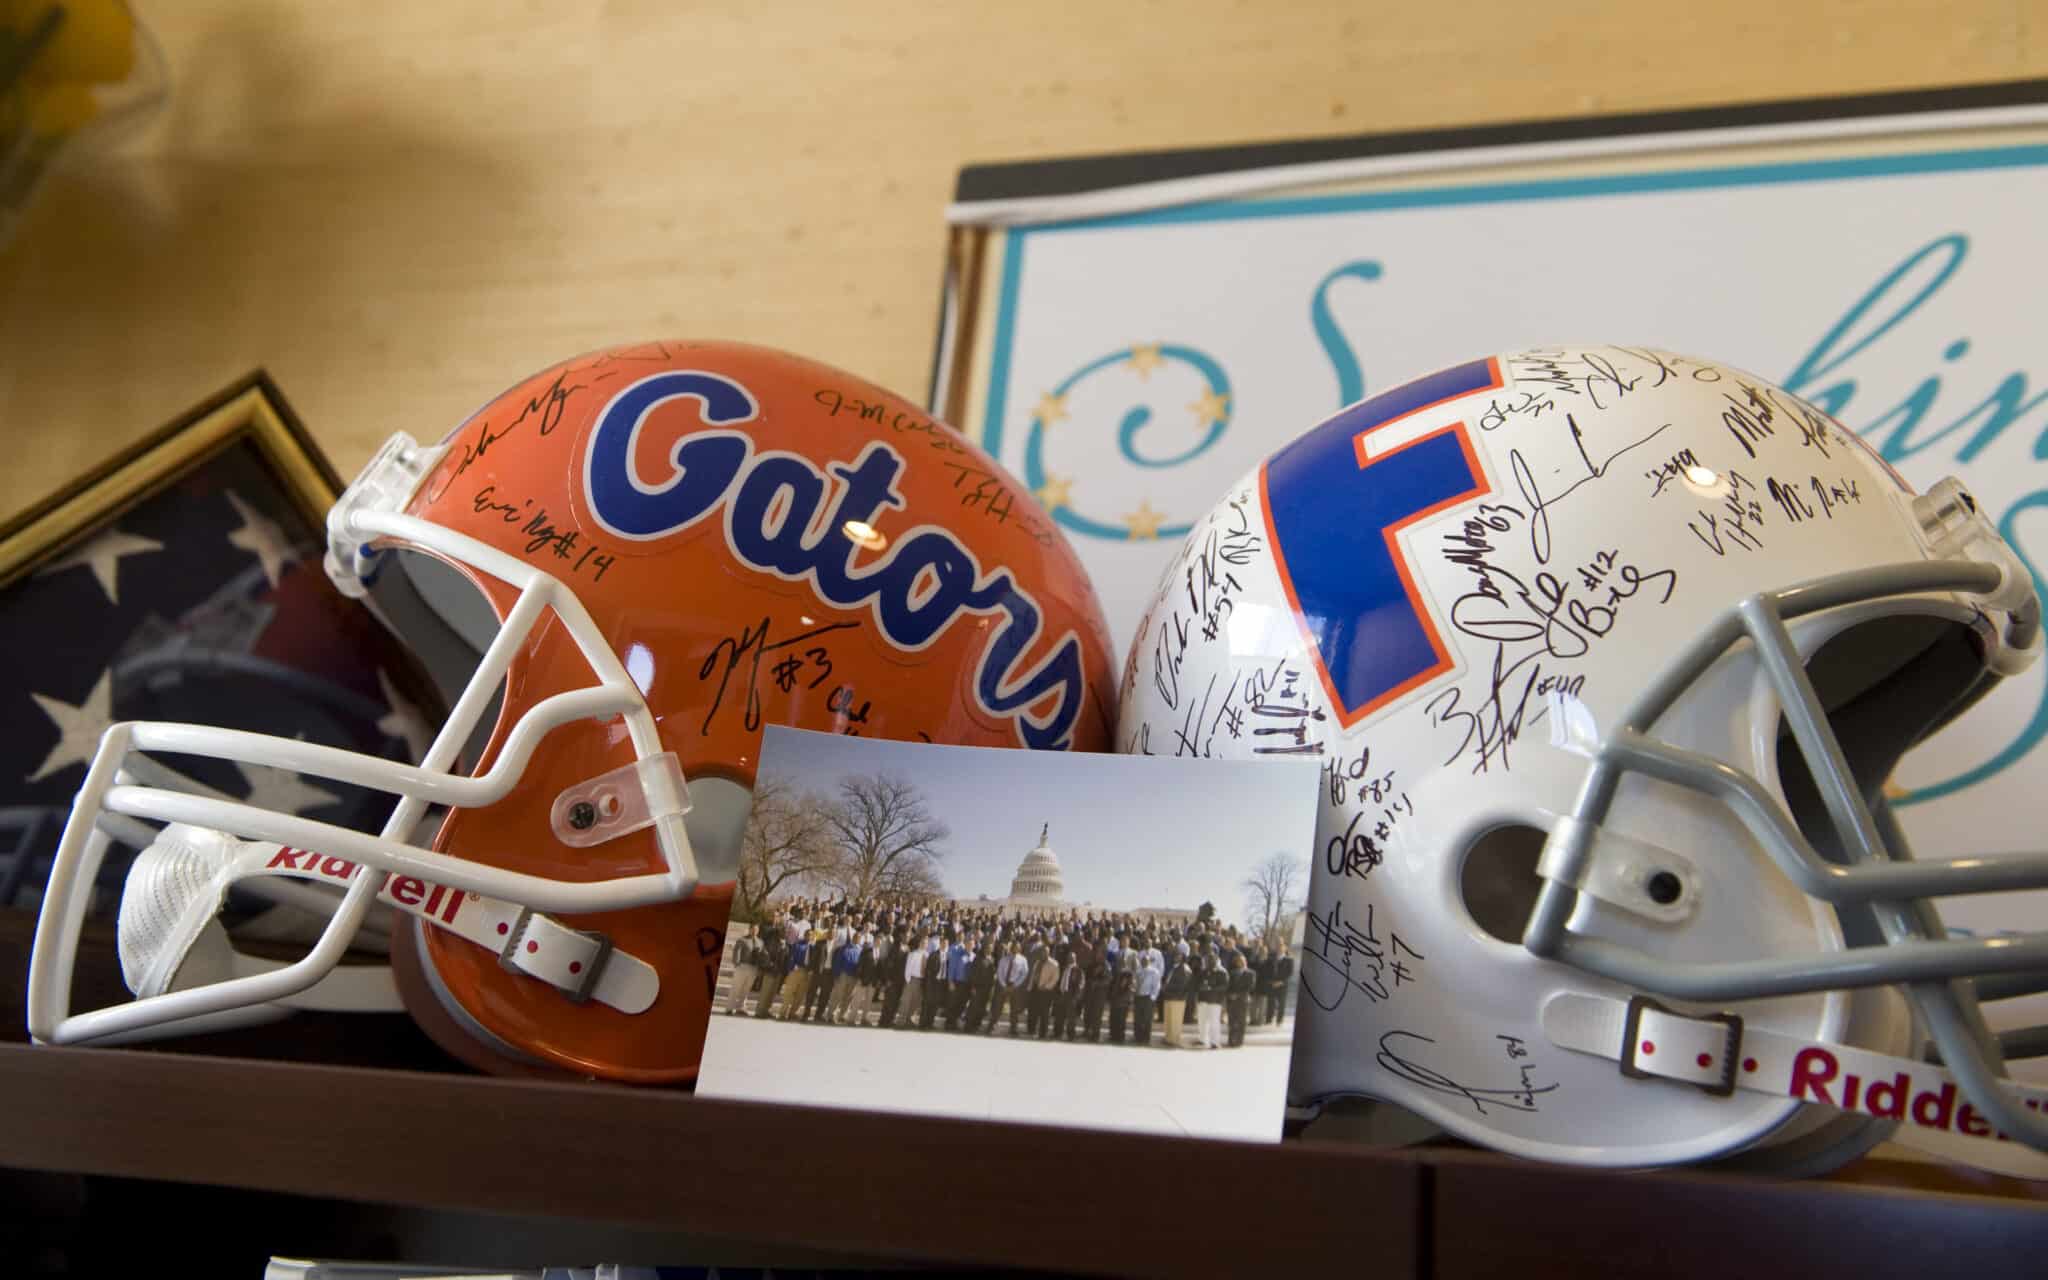 UNITED STATES - NOVEMBER 29: Signed helmets from the national championship University of Florida Gators team are on display in Florida House, at East Capitol and 2nd Sts., NE.  Photo By Tom Williams/Roll Call)